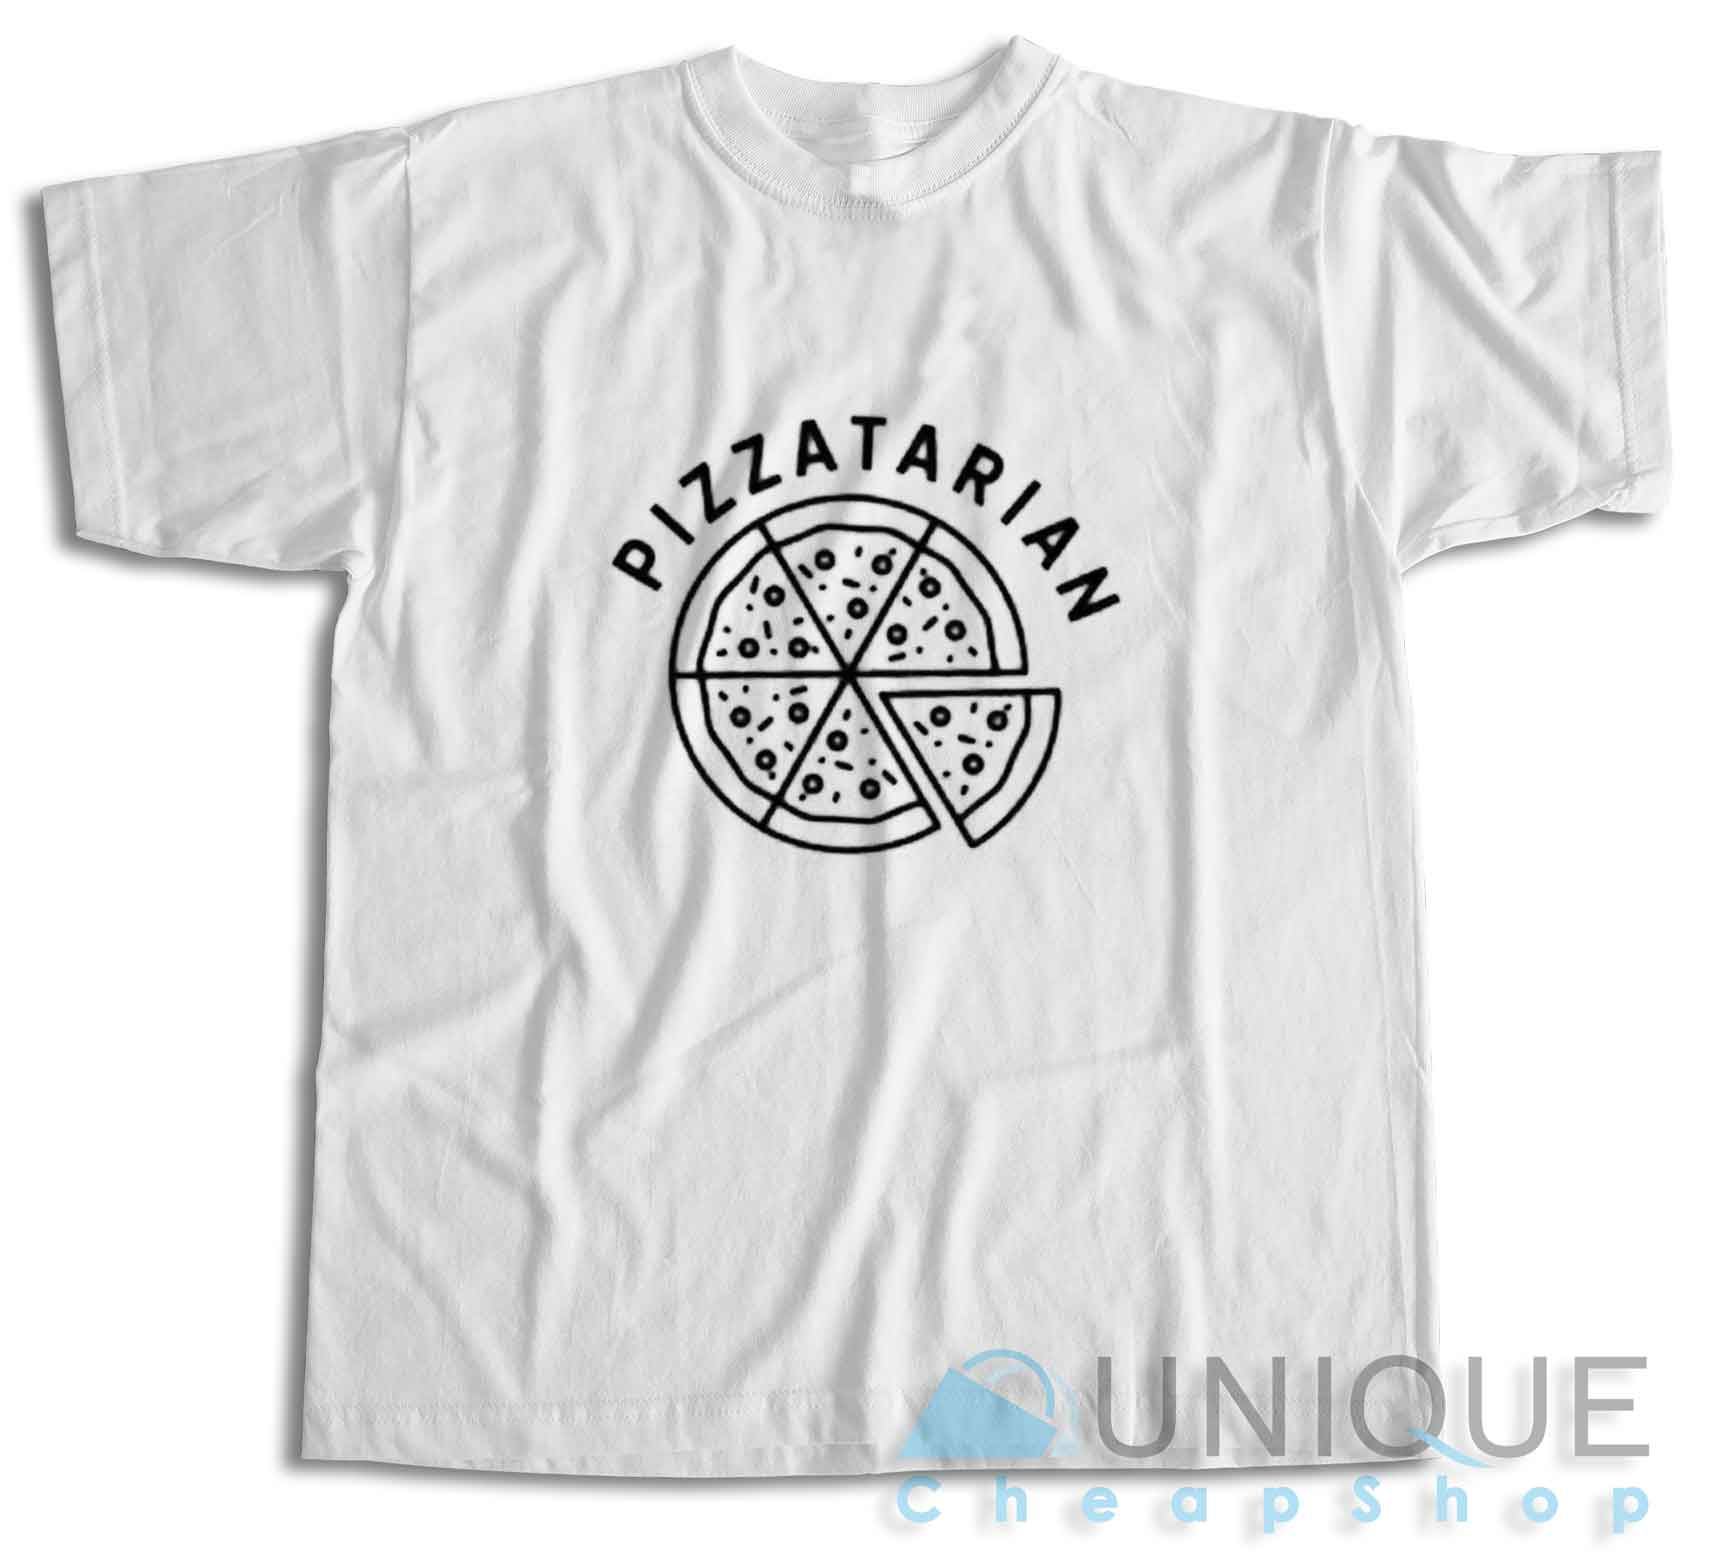 Pizzatarian T-Shirt Color White